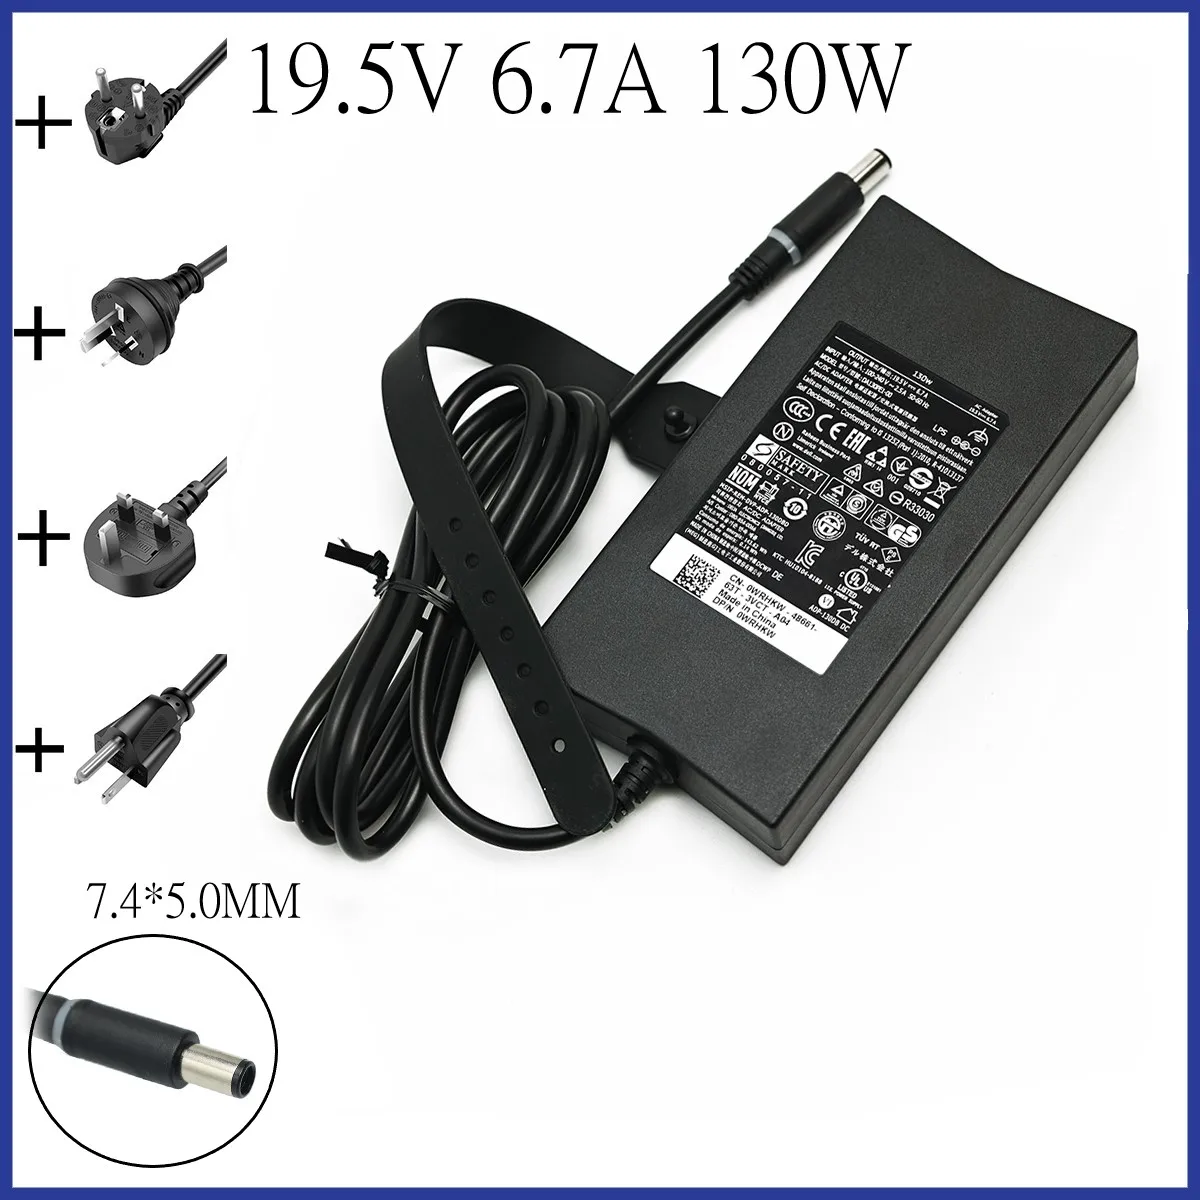 

AC Adapter 19.5V 6.7A 130W Laptop Charger For Dell Lnspiron 15 5576 5577 7557 7559 7566 7567 17R N7110 XPS Gen 2 PA-4E P60F002